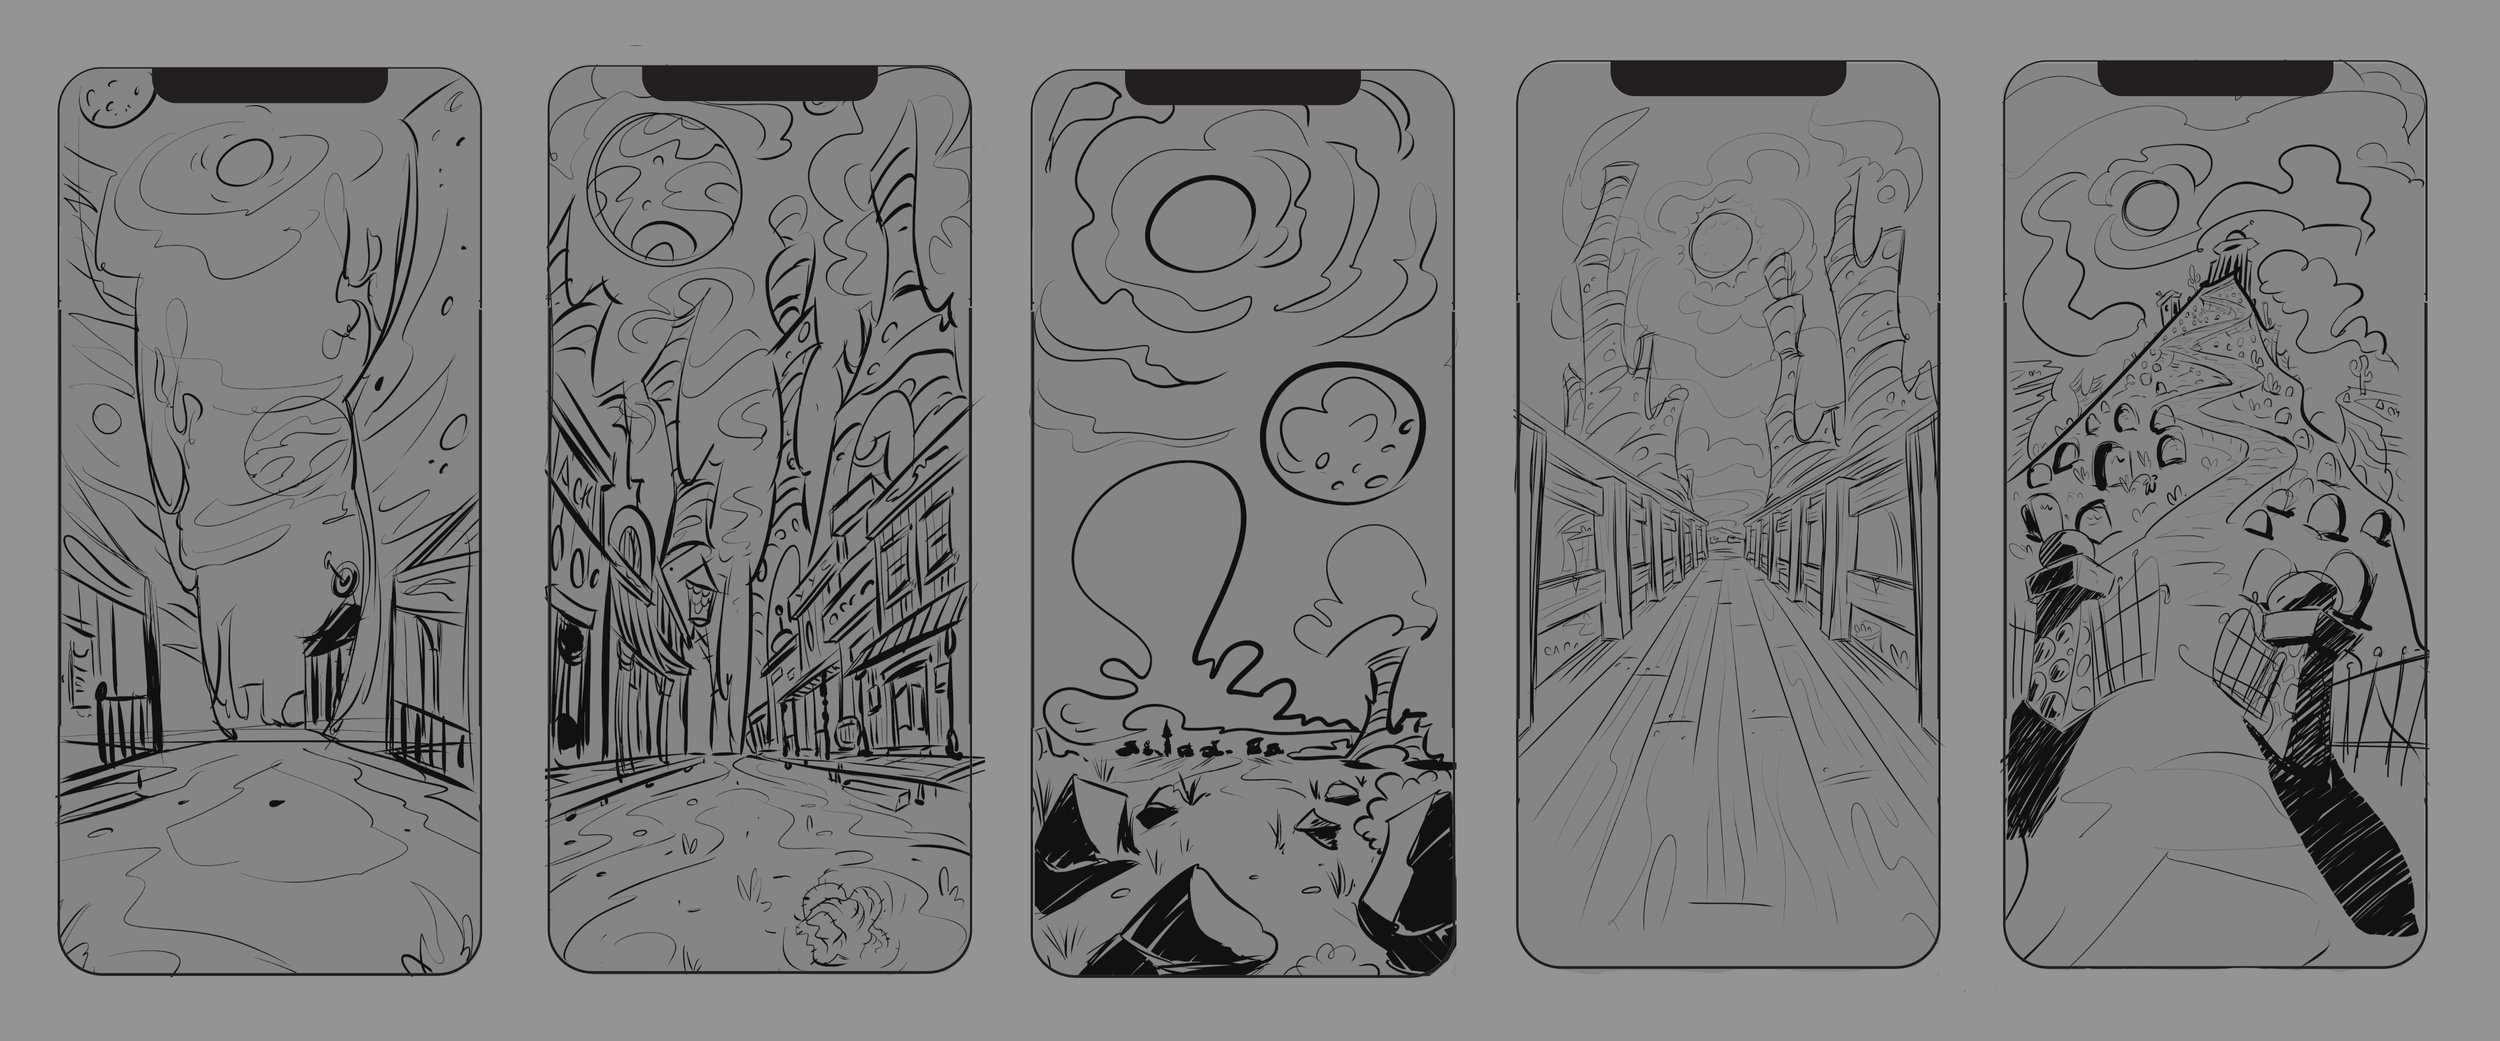 Western Slot Game Background Sketches